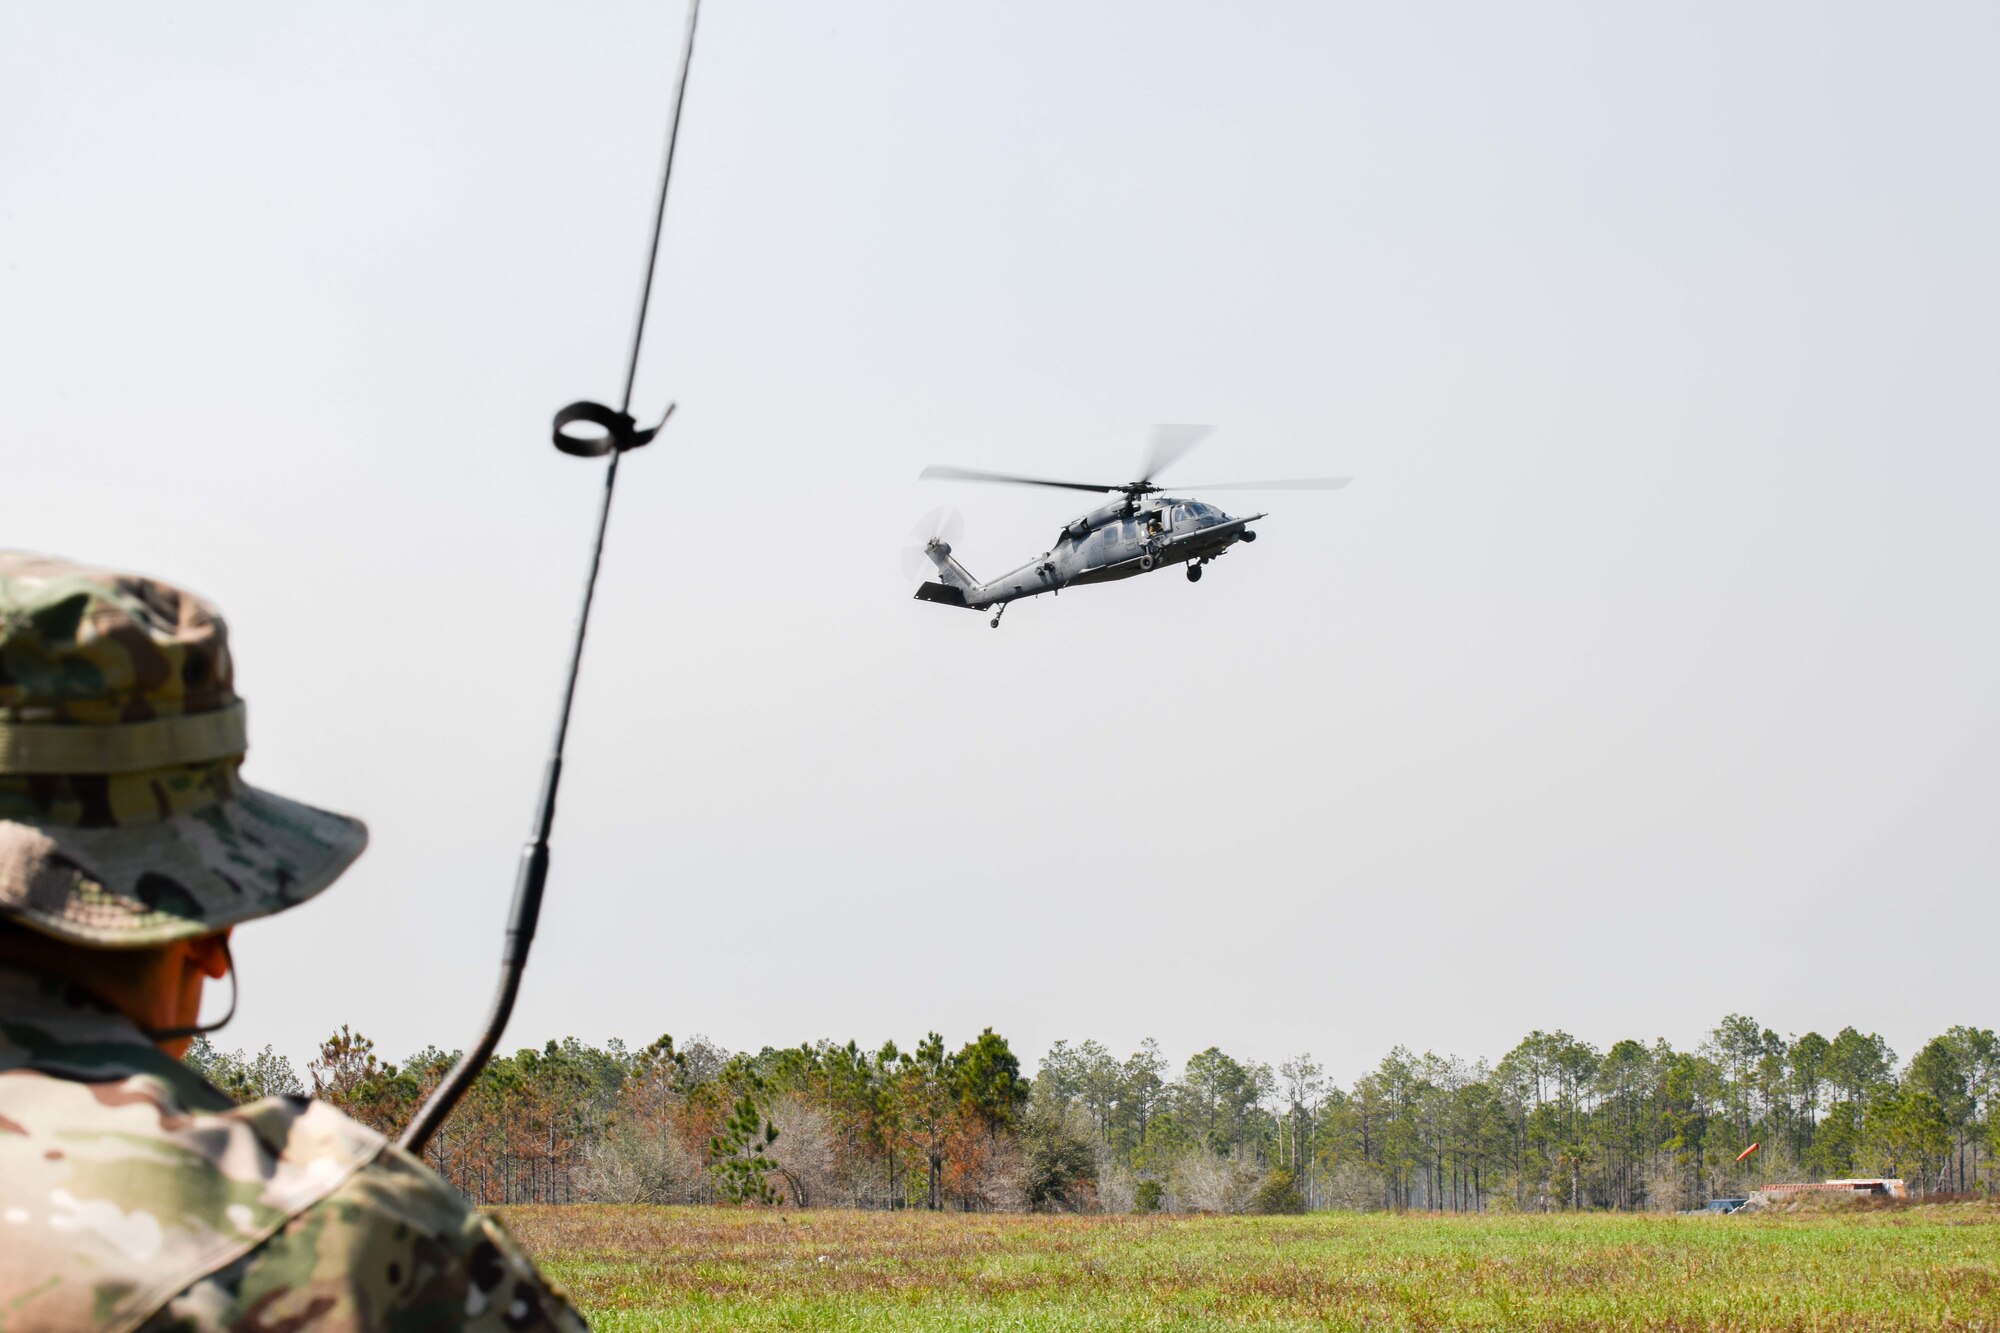 FTX Exercise tests wing capabilities